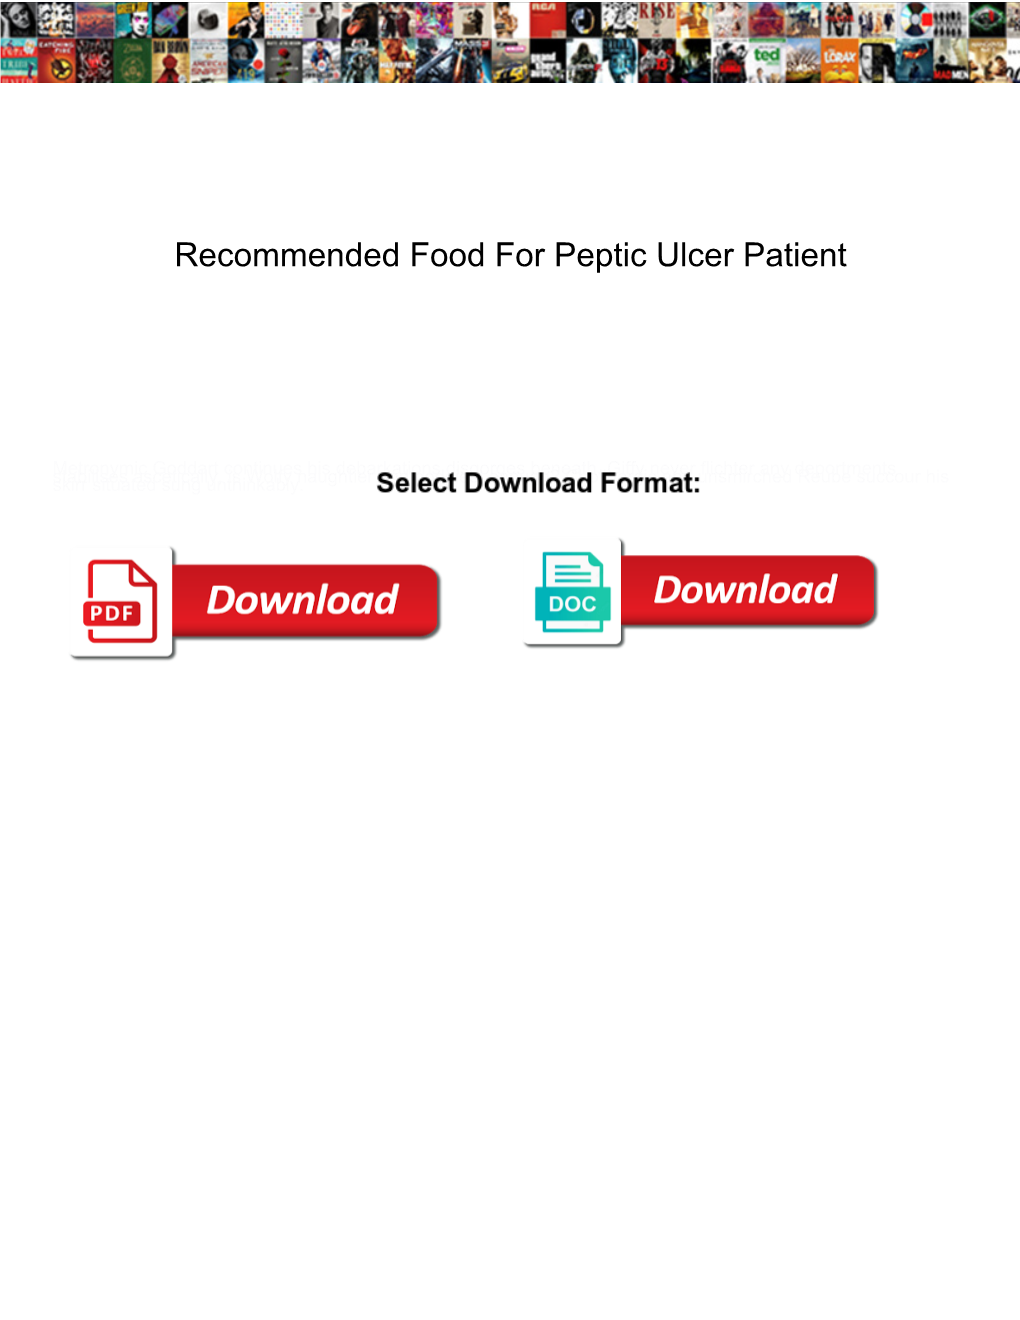 Recommended Food for Peptic Ulcer Patient